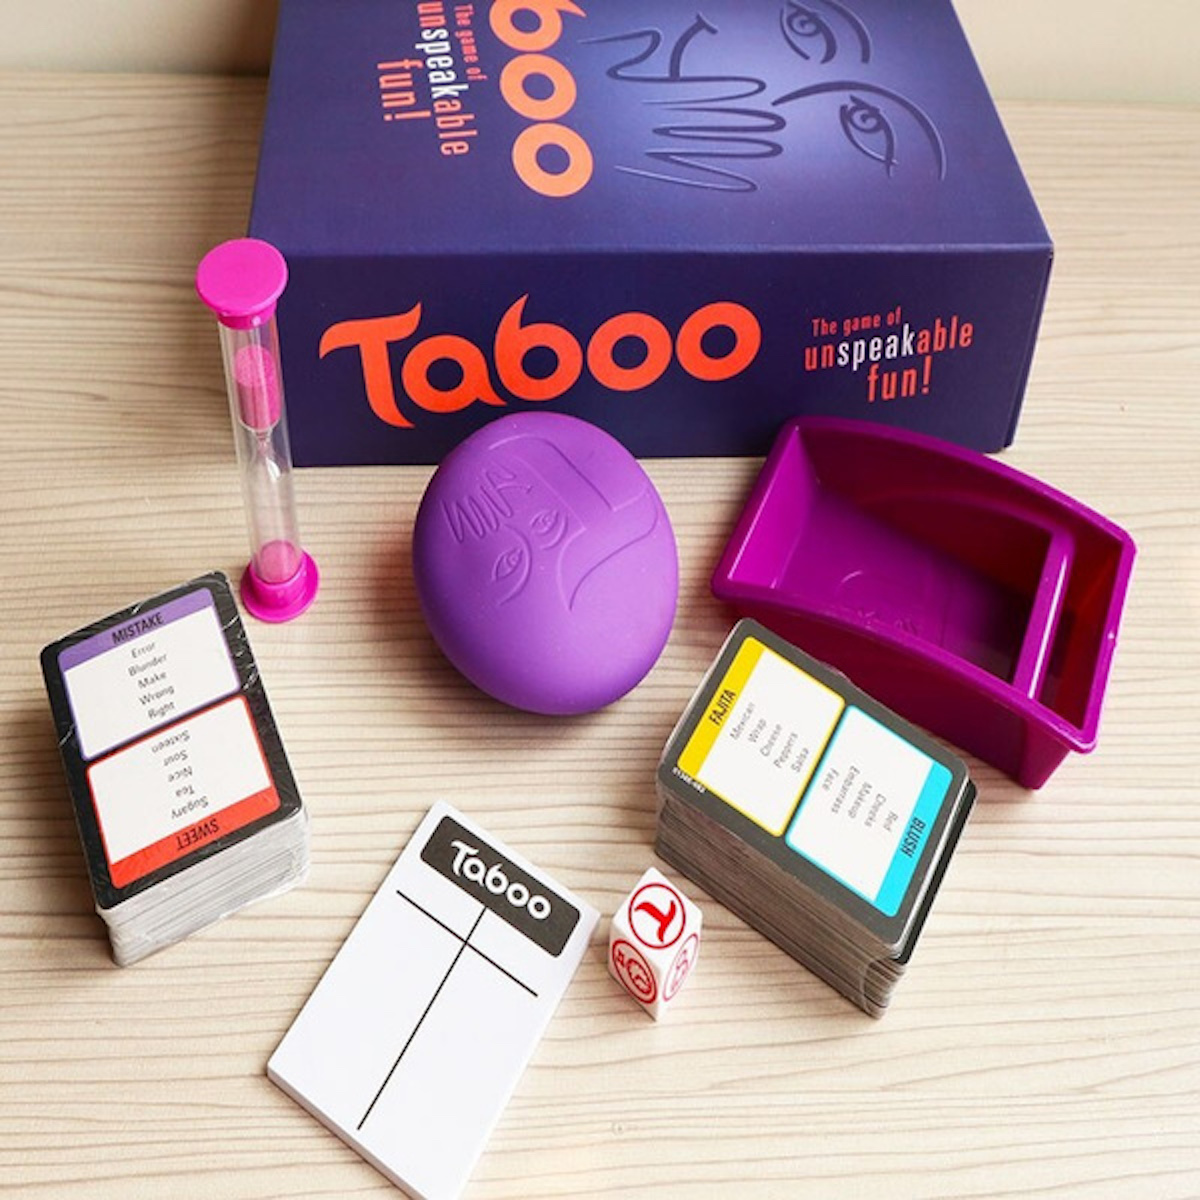 taboo board game spread out on table